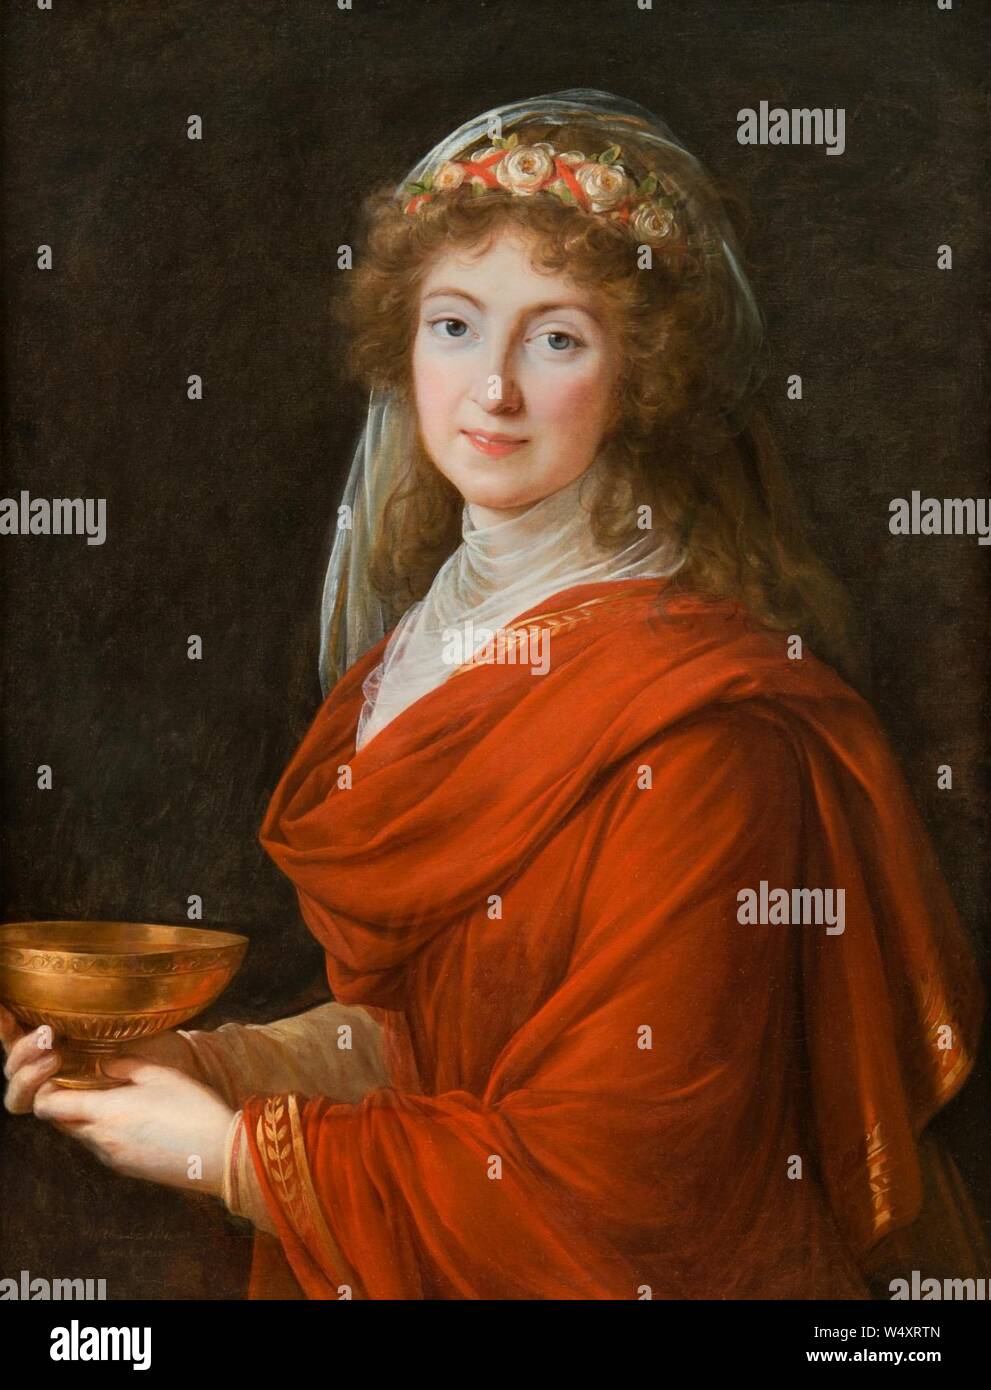 Countess Siemontkowsky Bystry by Vigee le Brun. Stock Photo